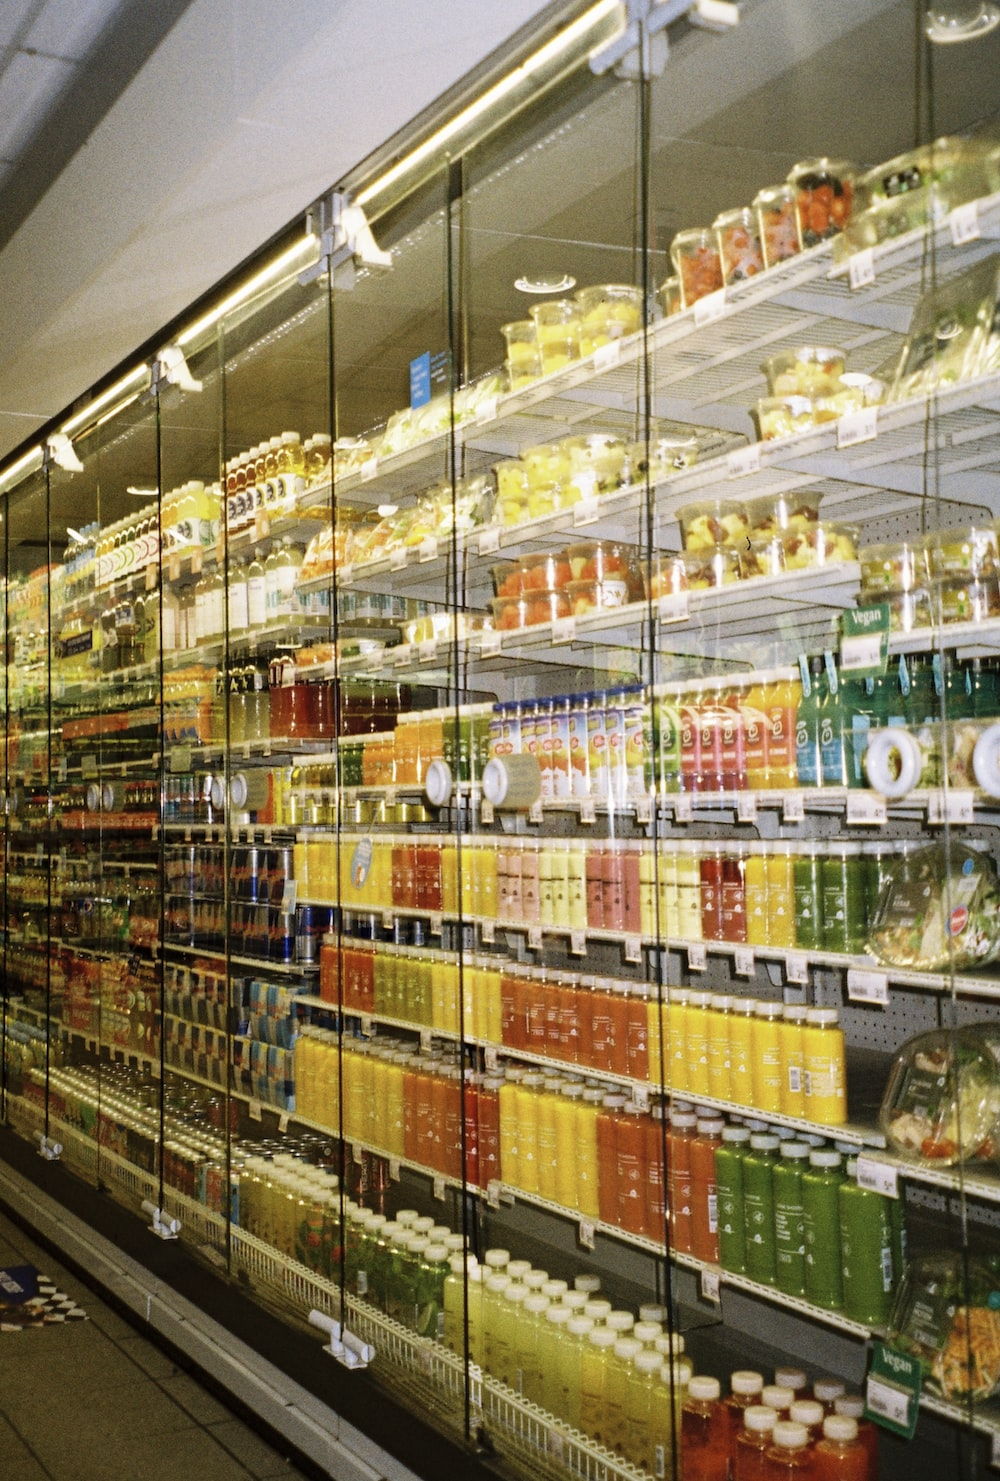 a stocked commercial refrigerator in a supermarket